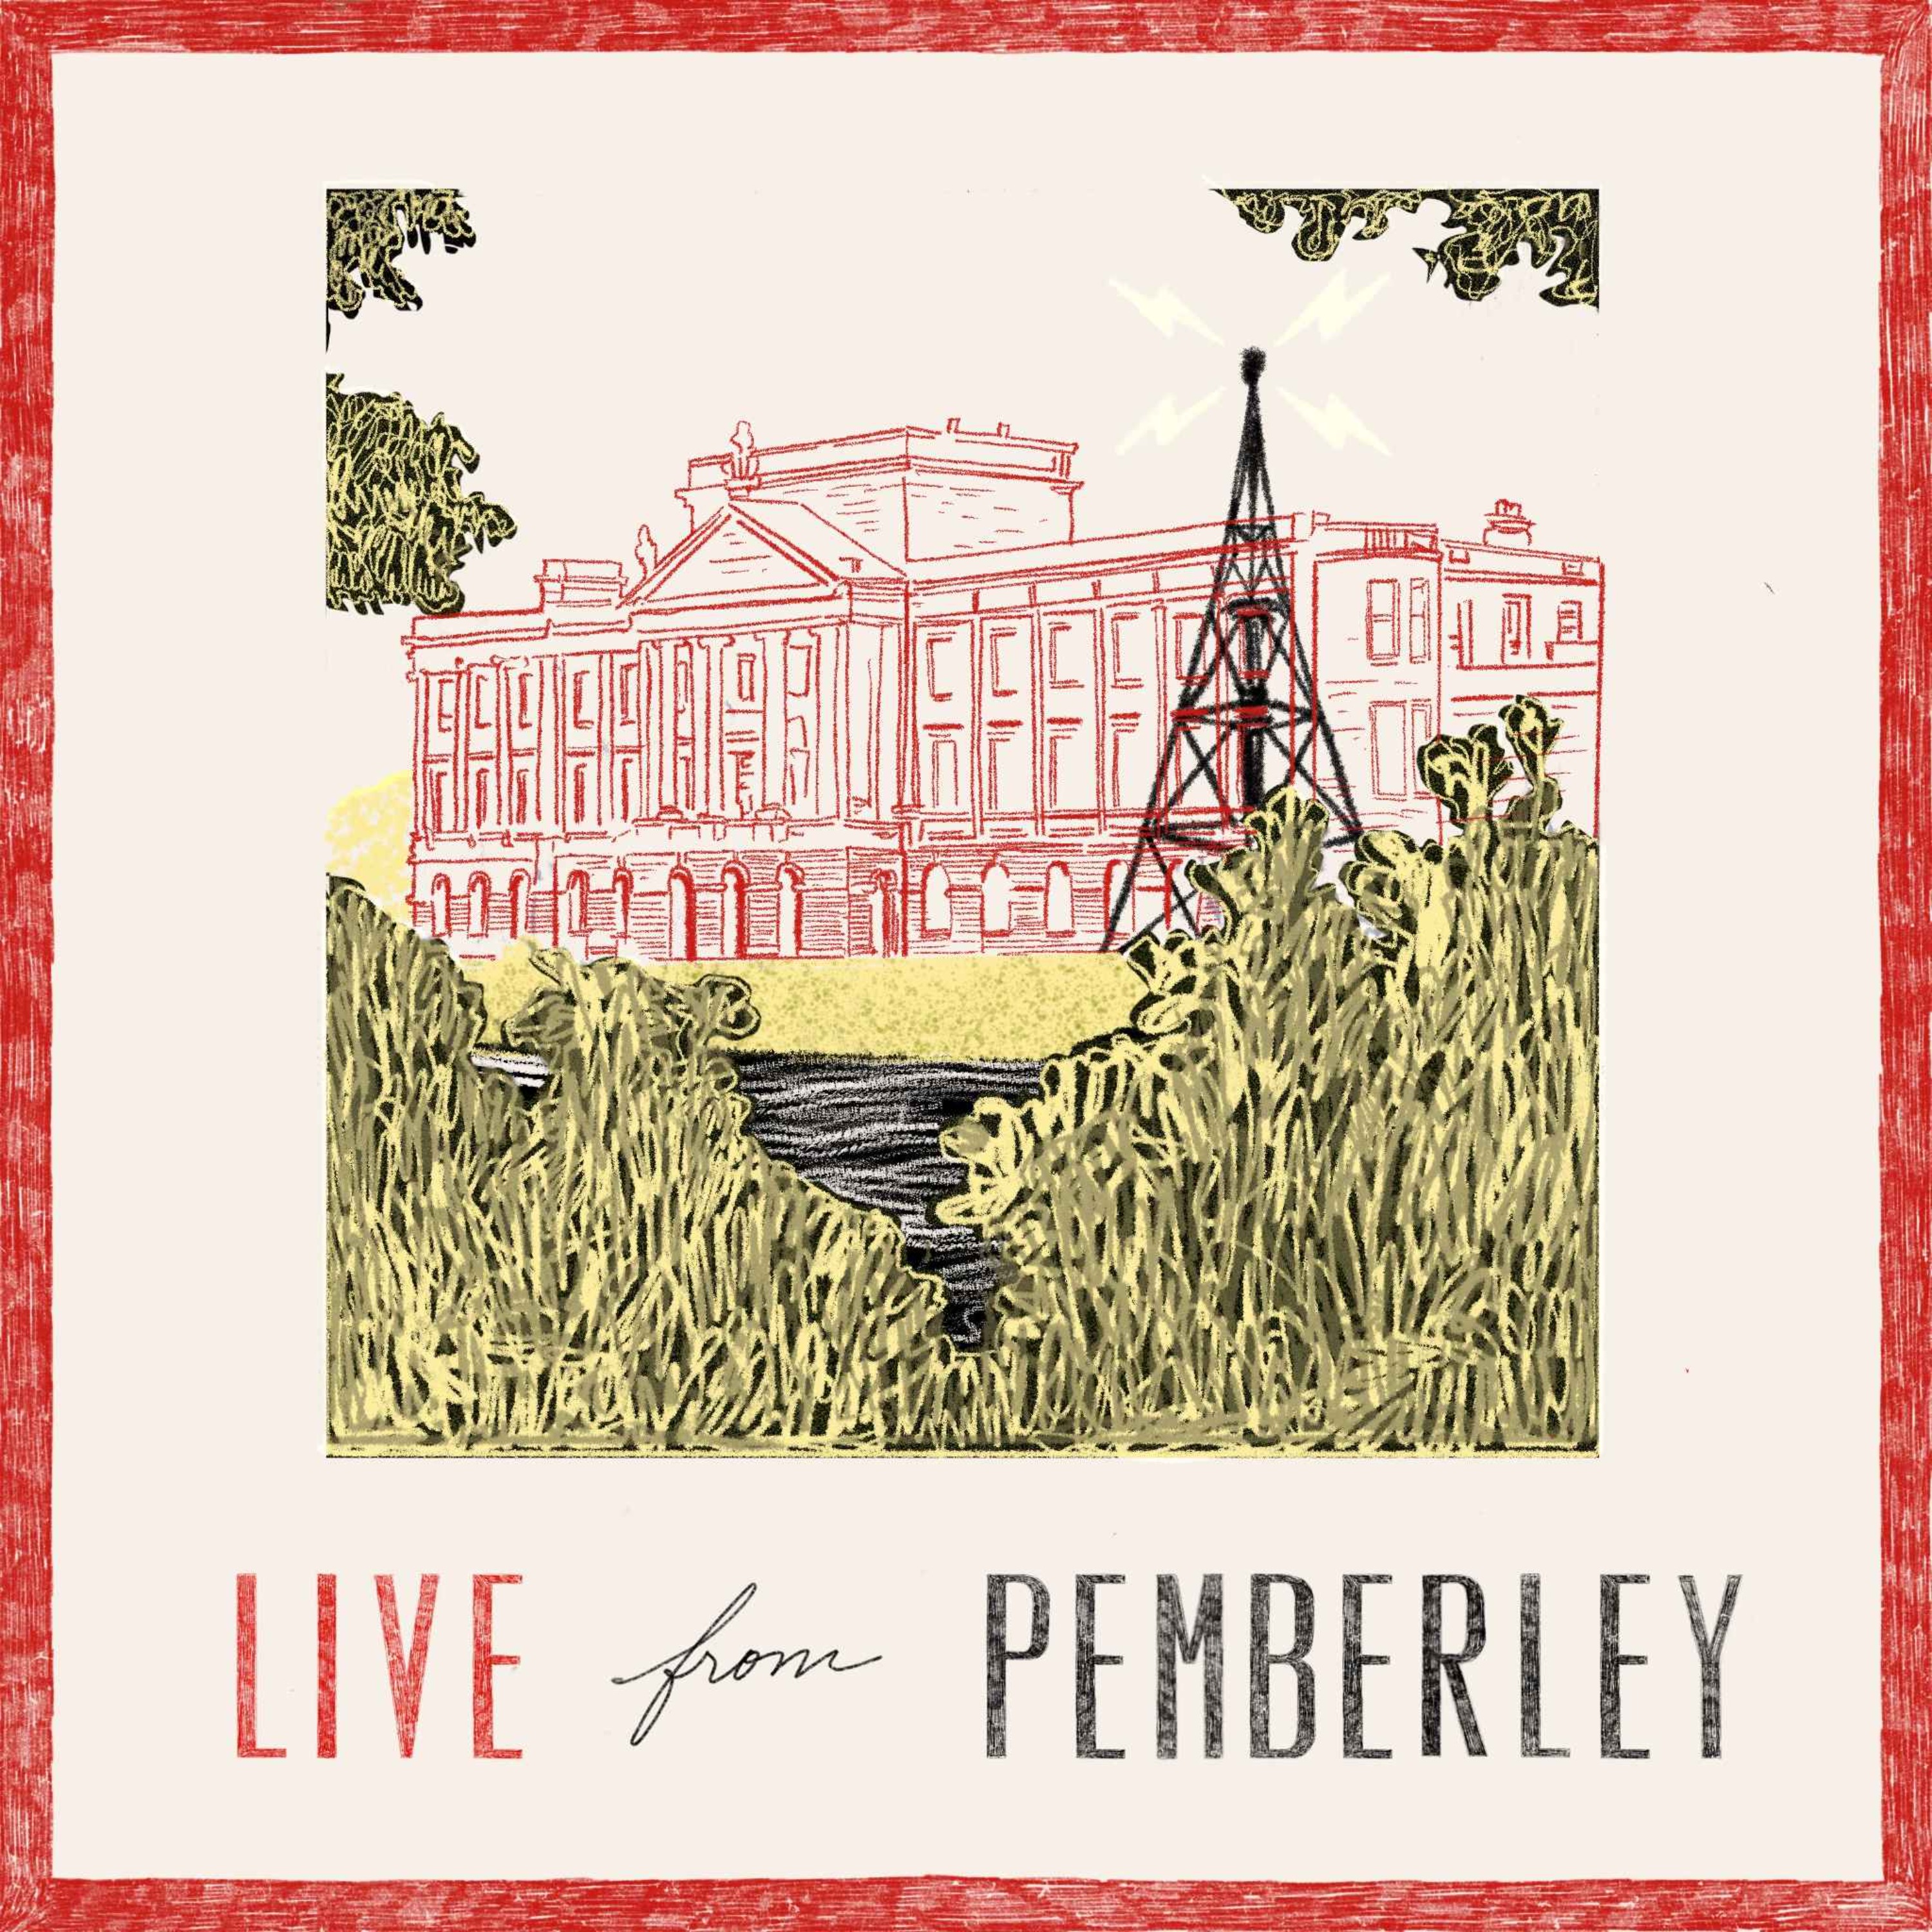 Live from Pemberley: Trailer